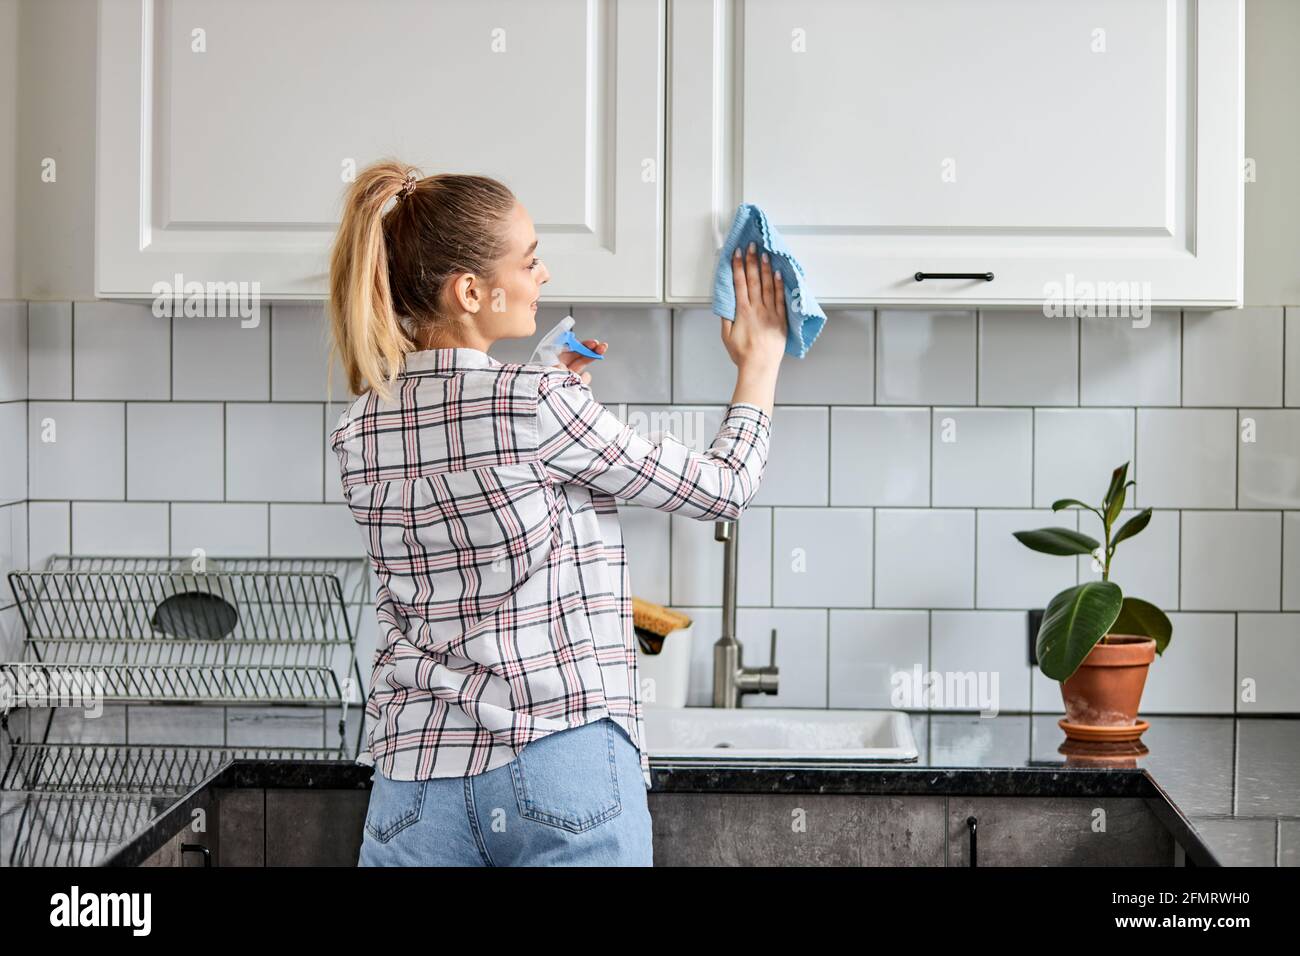 https://c8.alamy.com/comp/2FMRWH0/woman-washes-cleaning-kitchen-set-with-rag-or-cloth-house-professional-cleaning-service-caucasian-female-in-casual-wear-cleaning-kitchen-rear-view-2FMRWH0.jpg